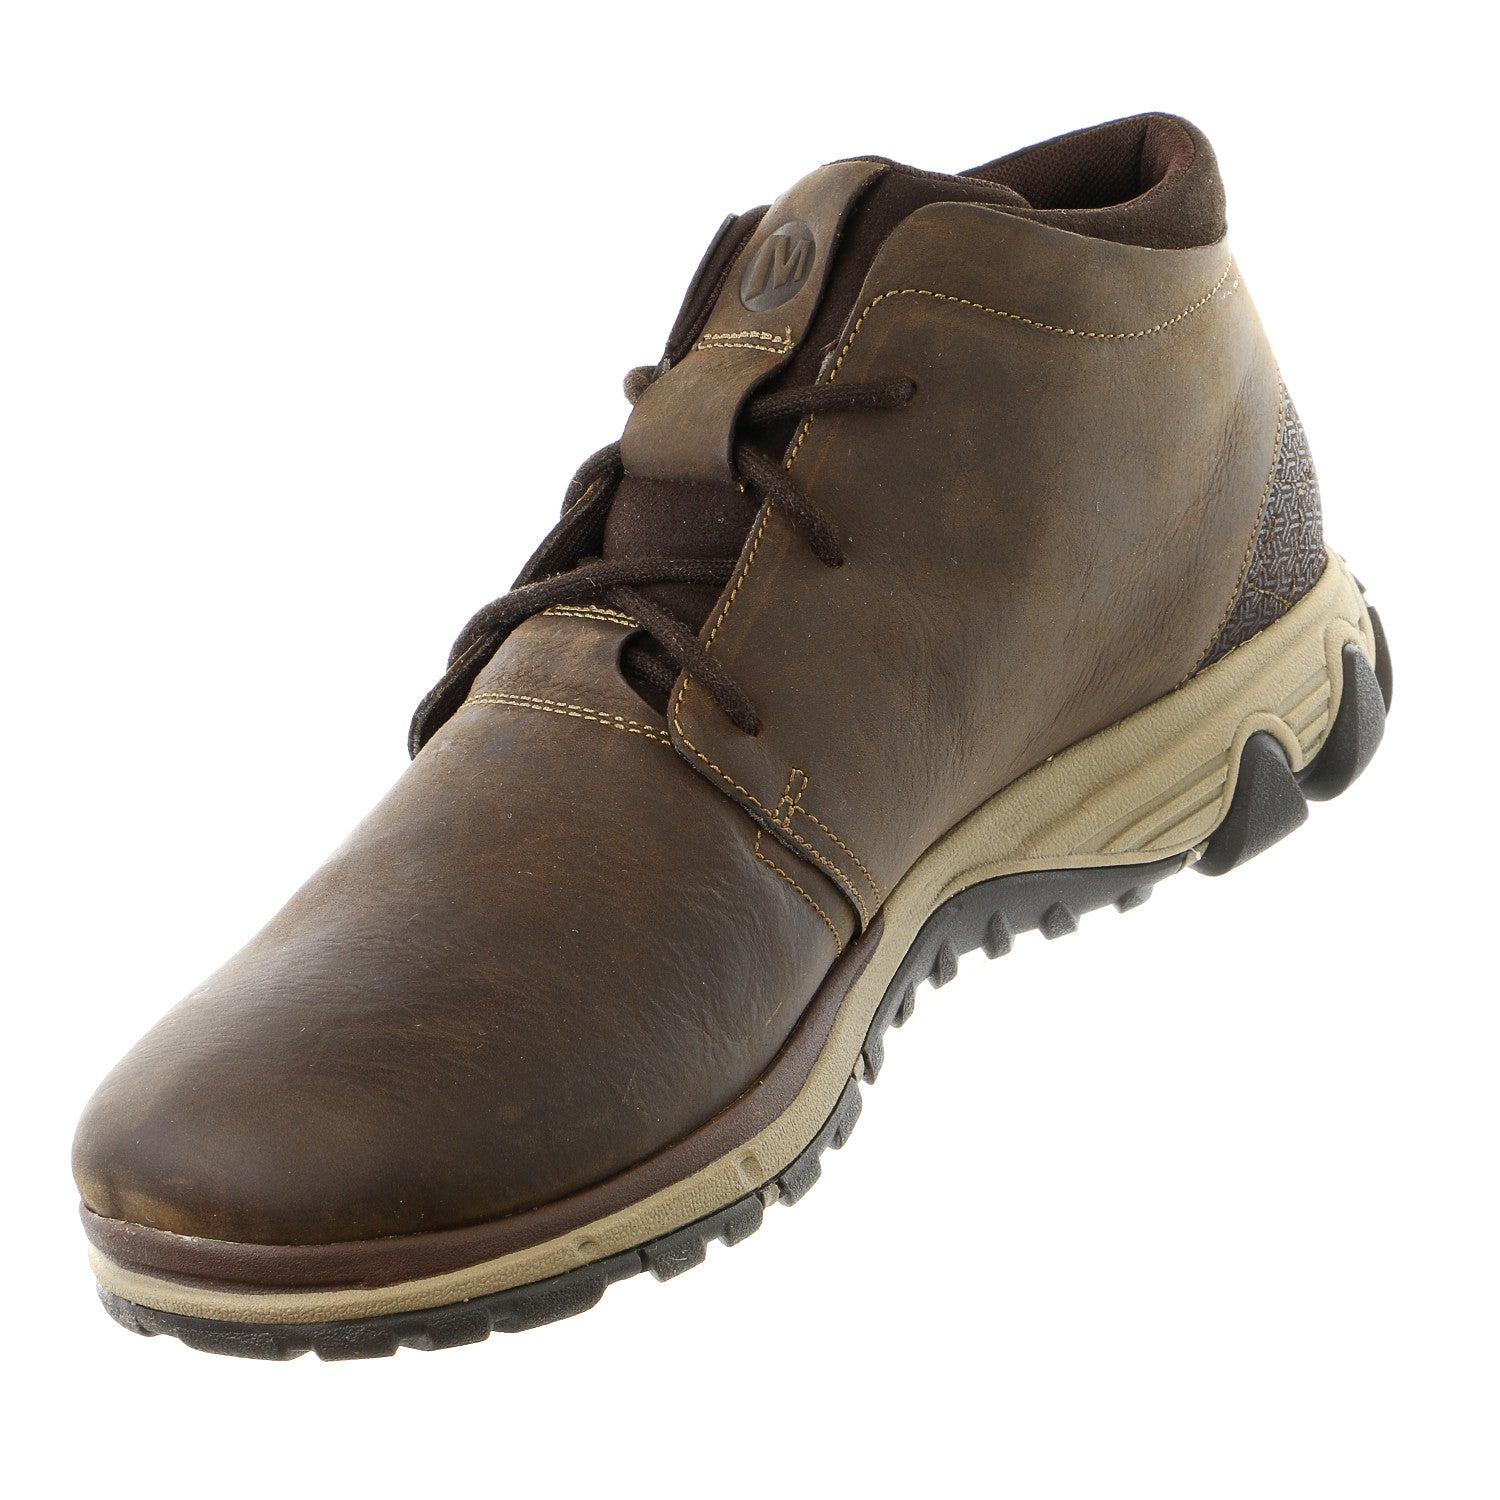 dechifrere Smidighed Trives Merrell All Out Blazer Chukka Leather Lace-Up - Men's - Shoplifestyle